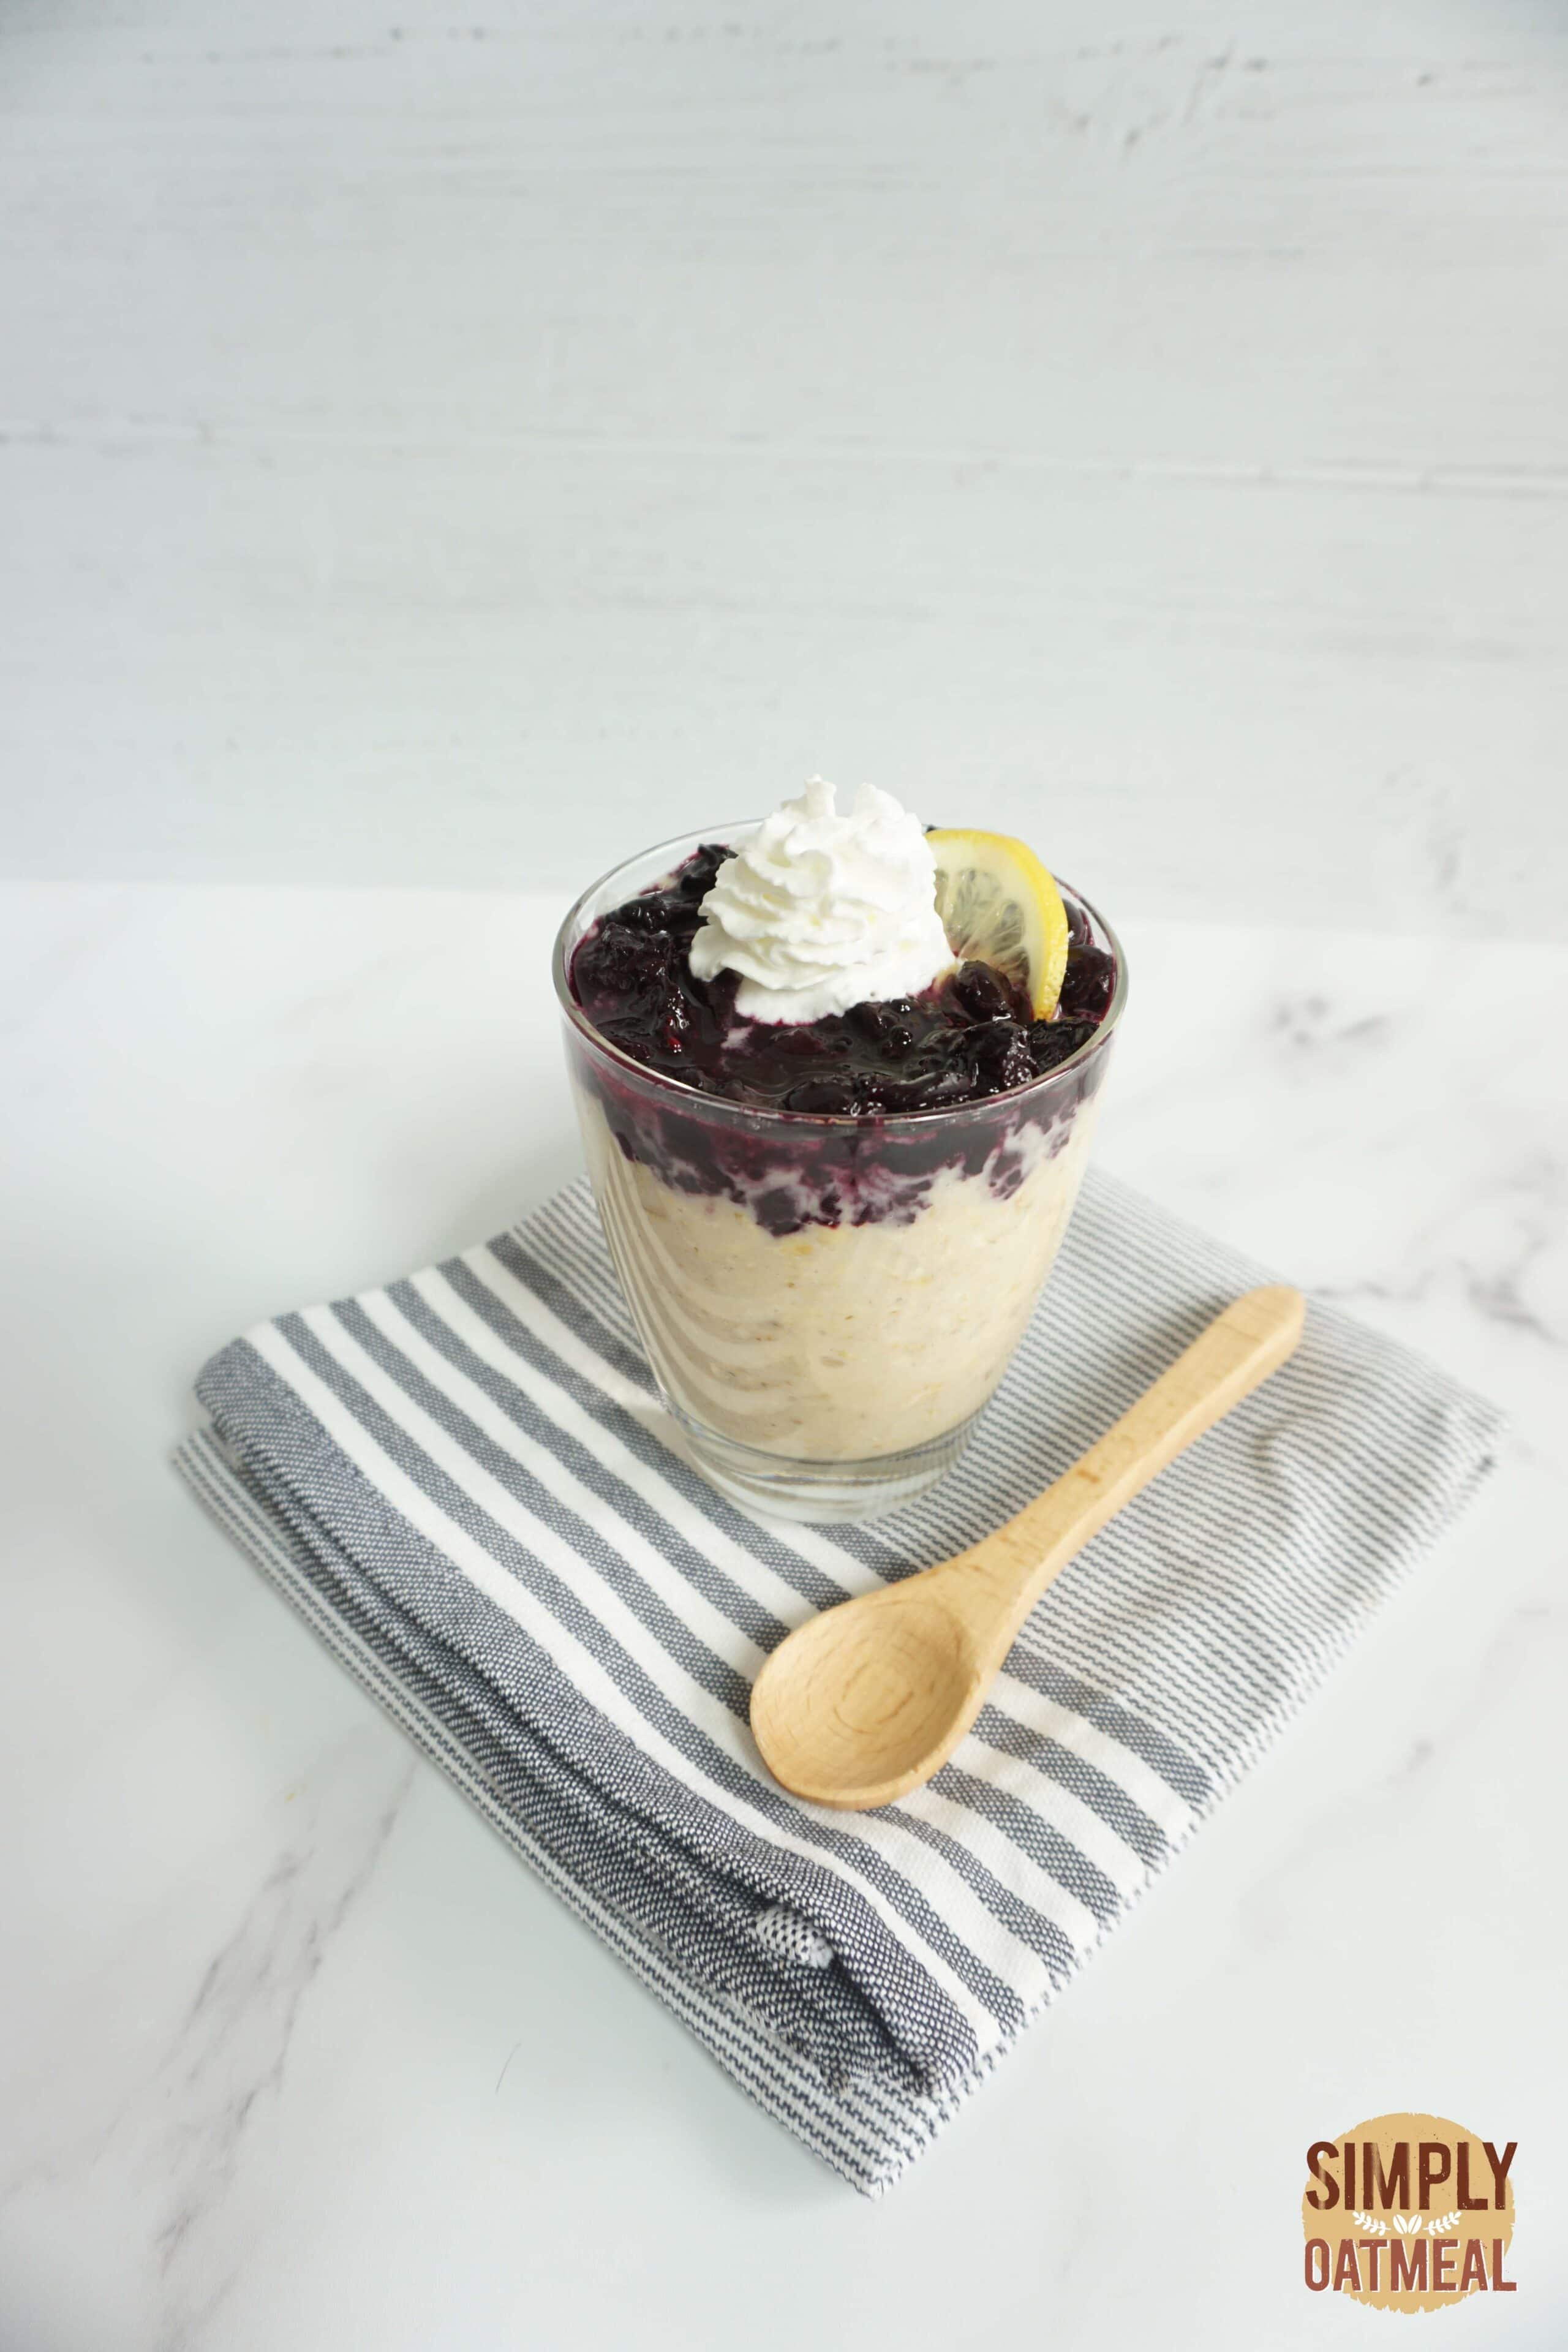 Blueberry lemonade overnight oats served in a glass cup with a wooden spoon on the side